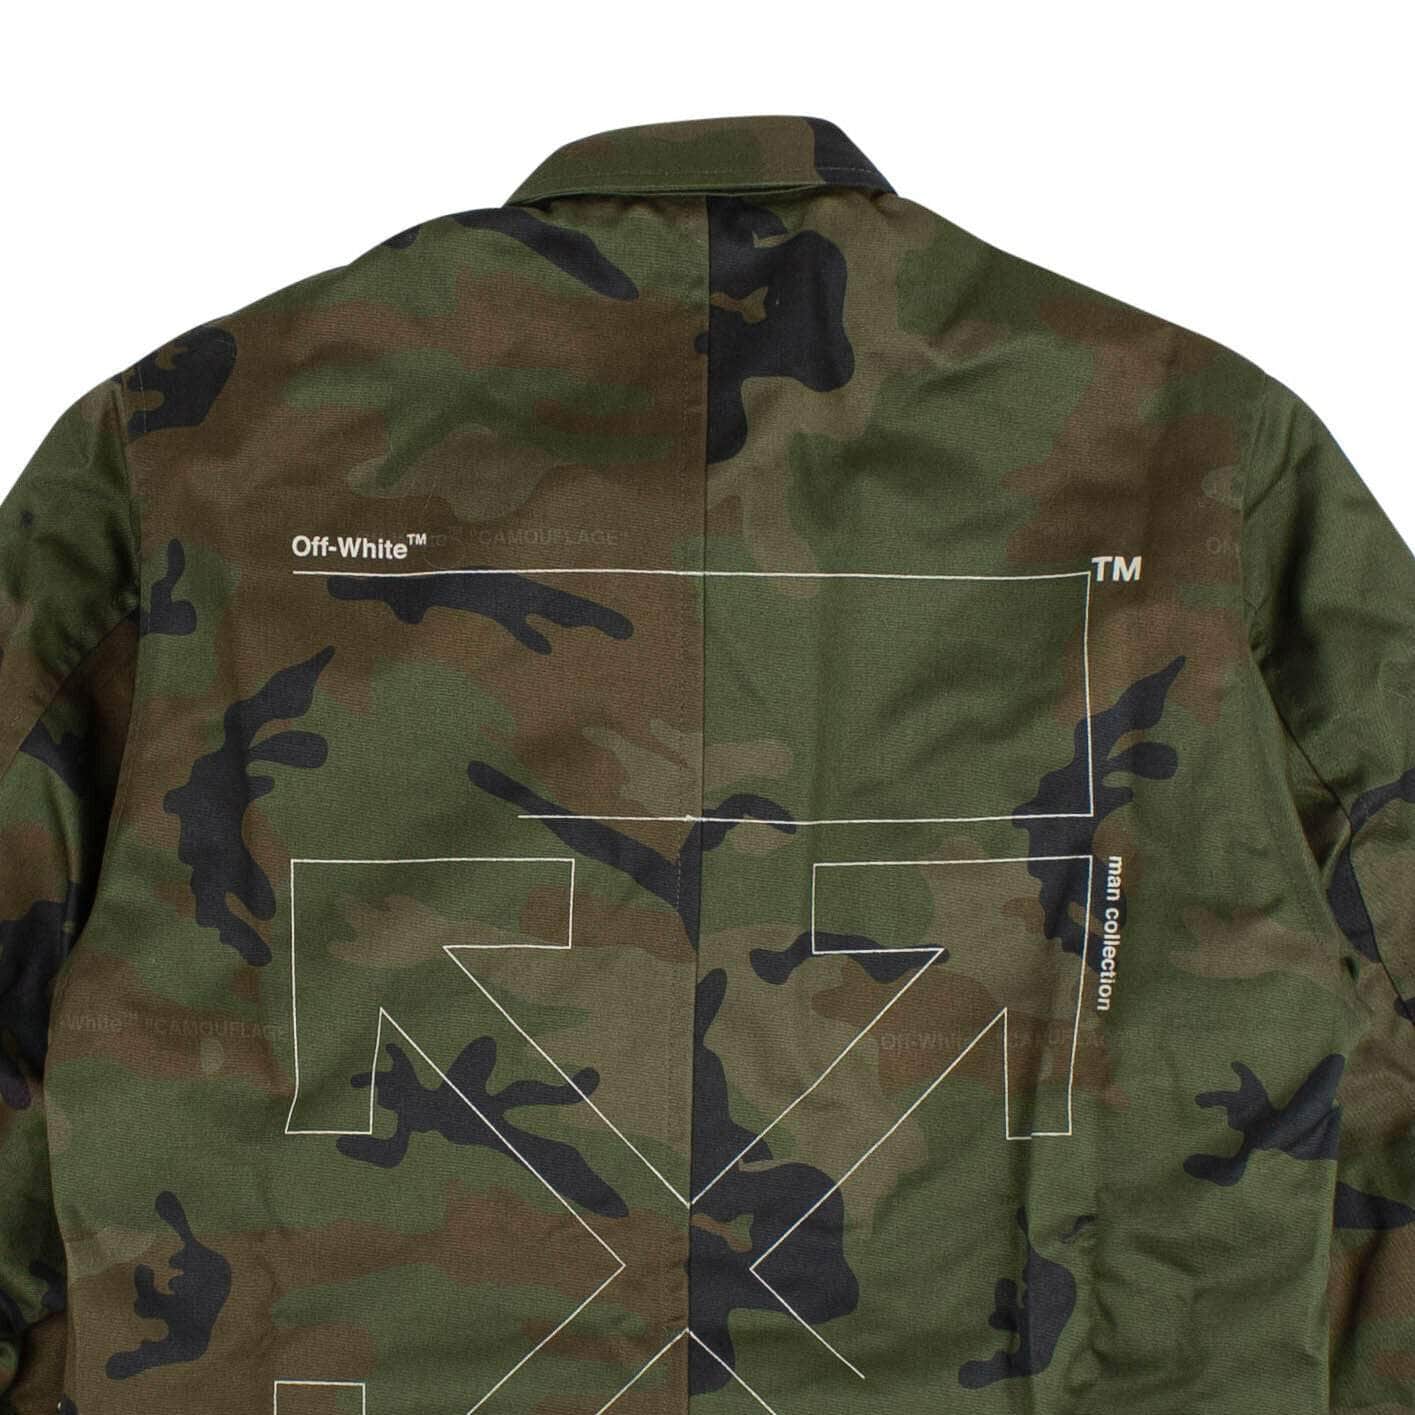 OFF-WHITE c/o VIRGIL ABLOH 1000-2000, channelenable-all, chicmi, couponcollection, gender-mens, main-clothing, main-outerwear, off-white-c-o-virgil-abloh, owch, size-l, size-m, size-xs Green Camouflage Field Jacket